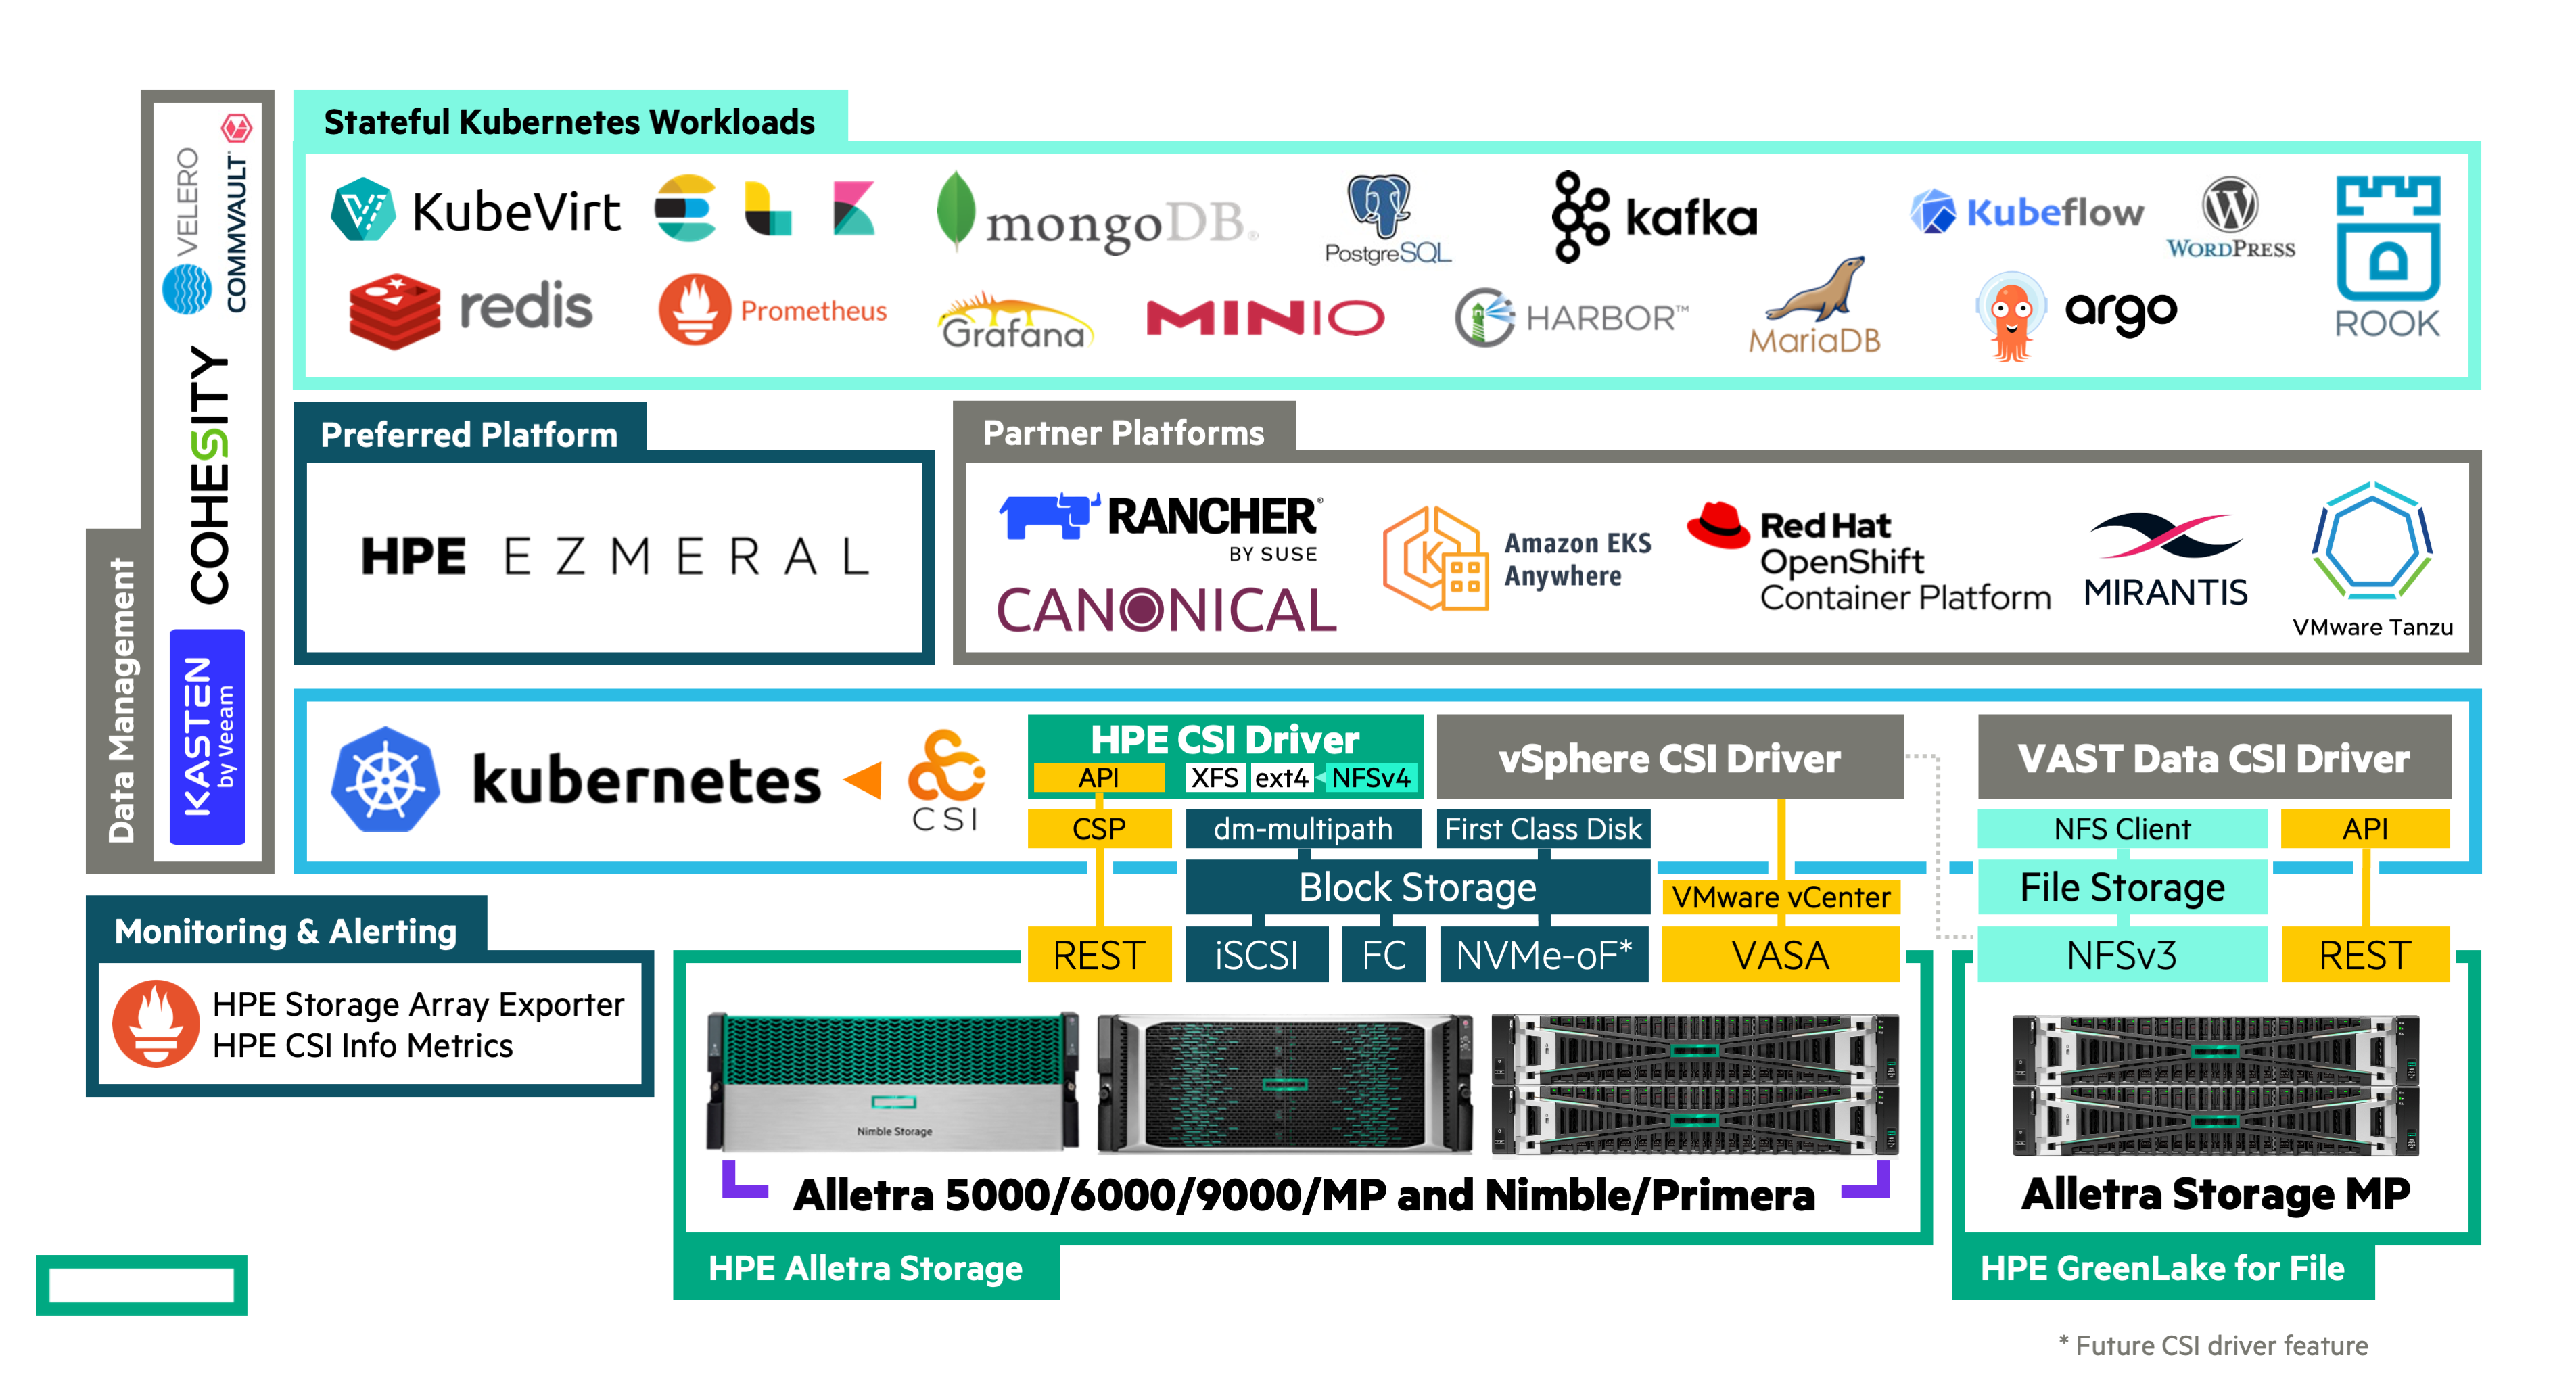 HPE CSI Driver for Kubernetes at-a-glance.